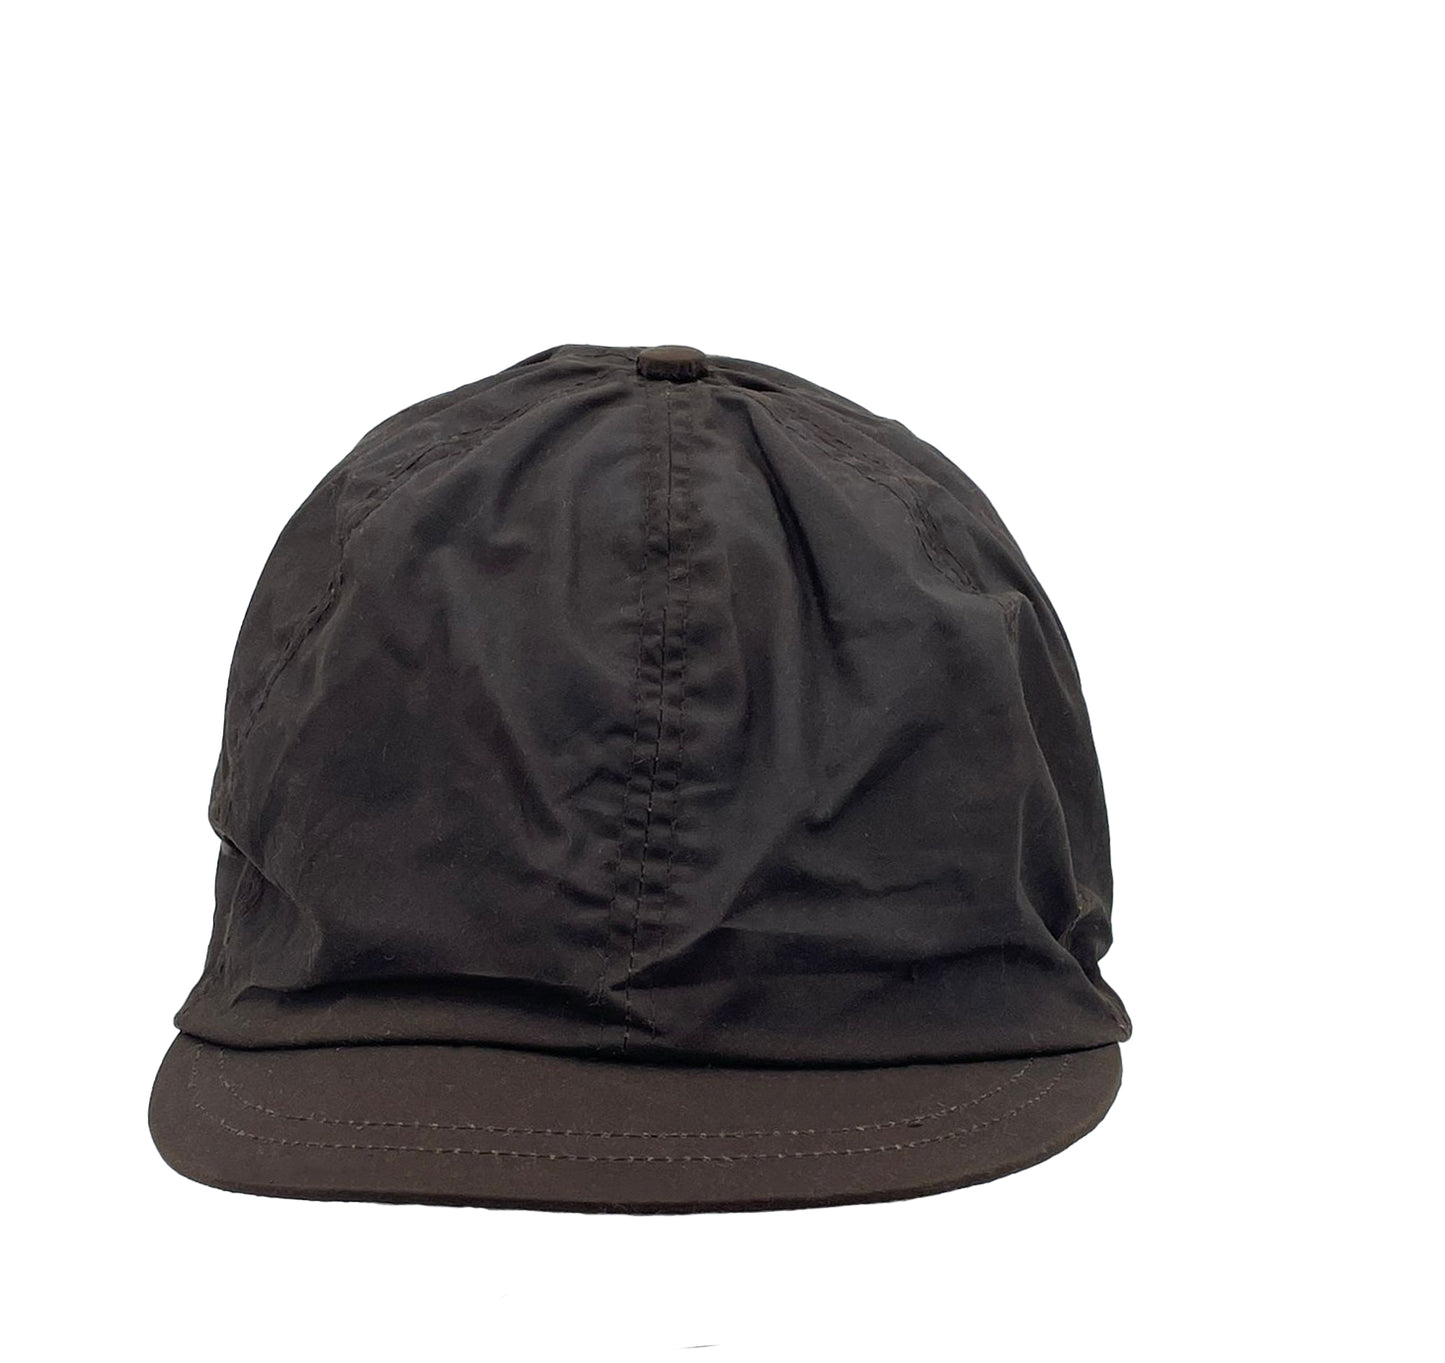 Ultra -light slide hat with elastic band | Men's cappi made of water-repellent cotton